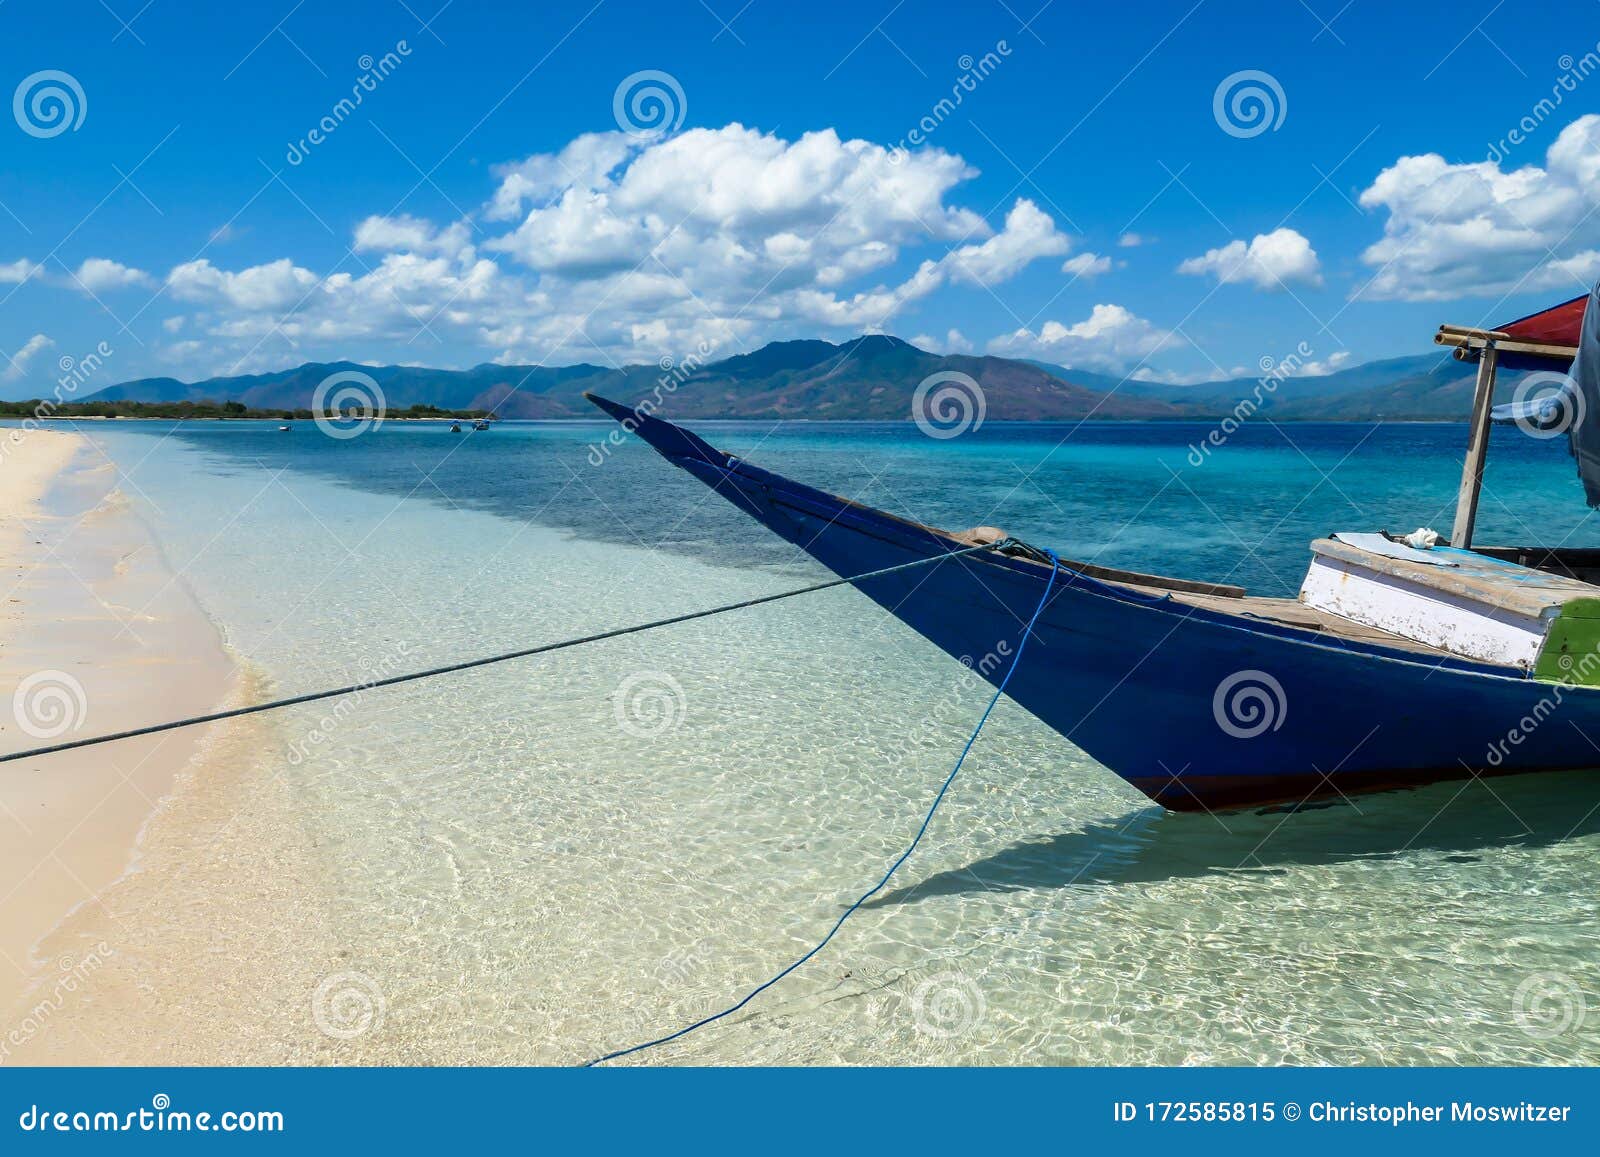 maumere - a boat anchored to a sandy beach